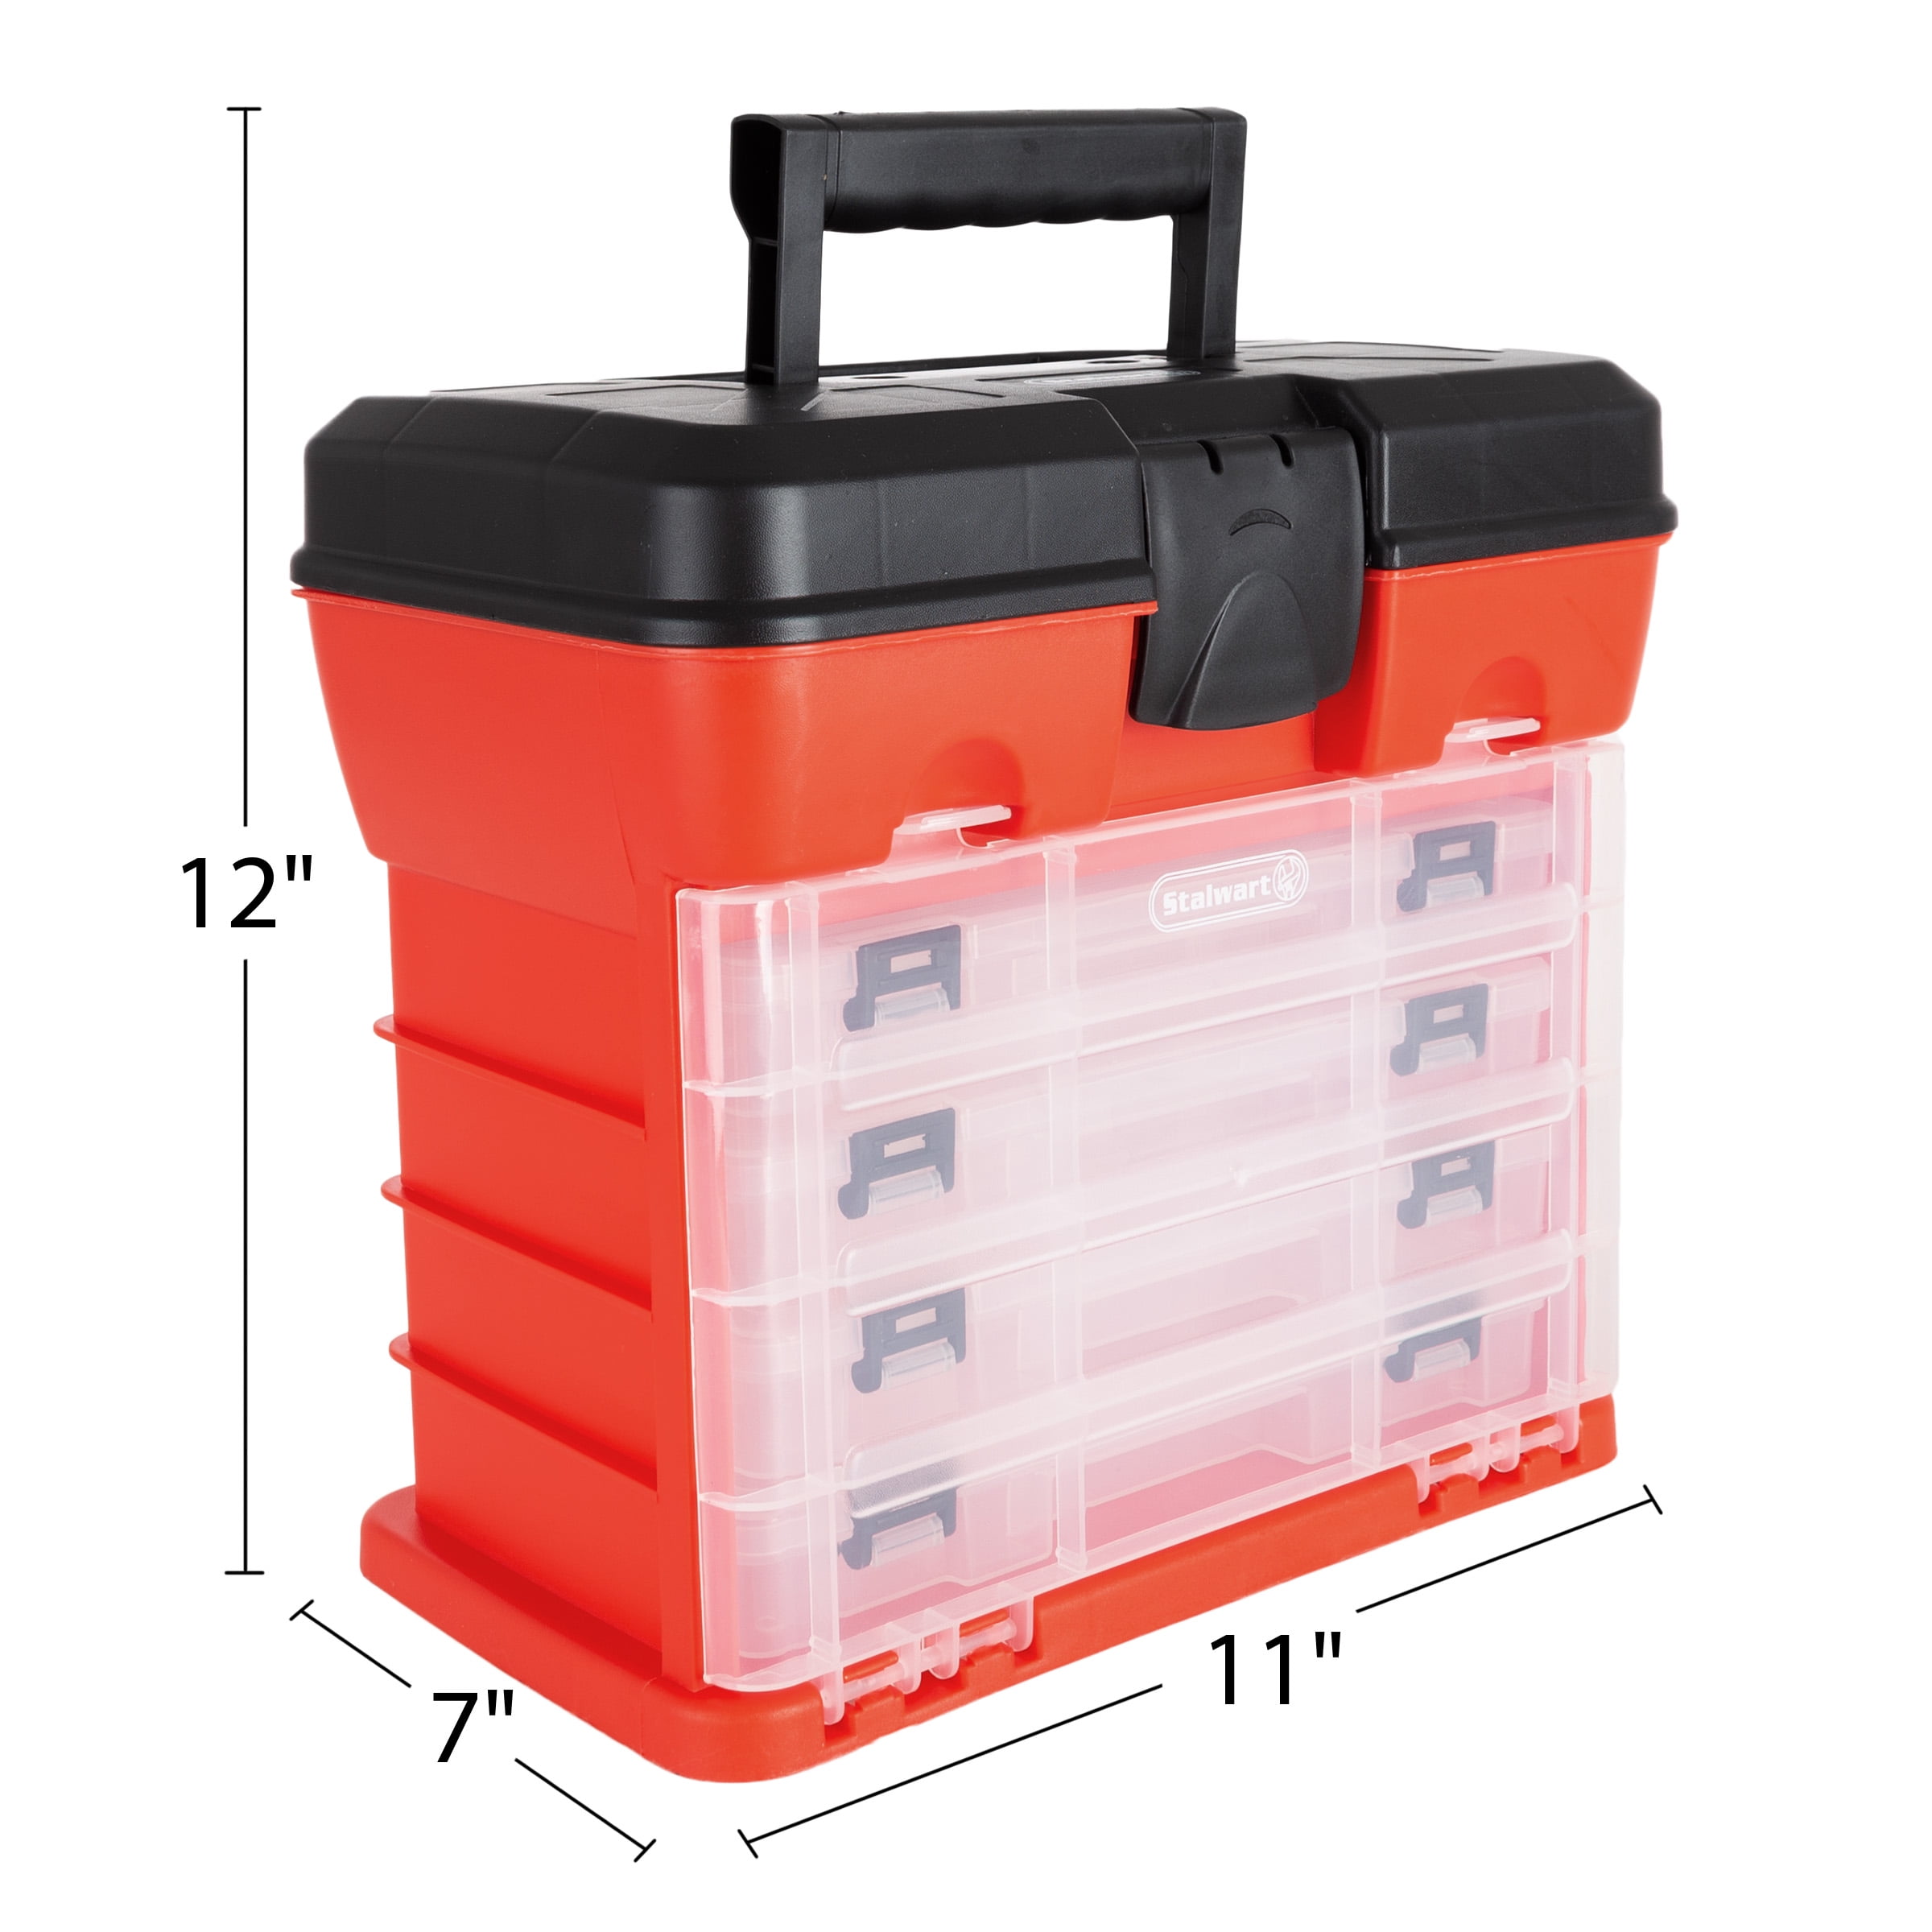 Portable Tool Box - Small Parts Organizer with Drawers and Customizable Compartments for Hardware, or Crafts by Stalwart - Red